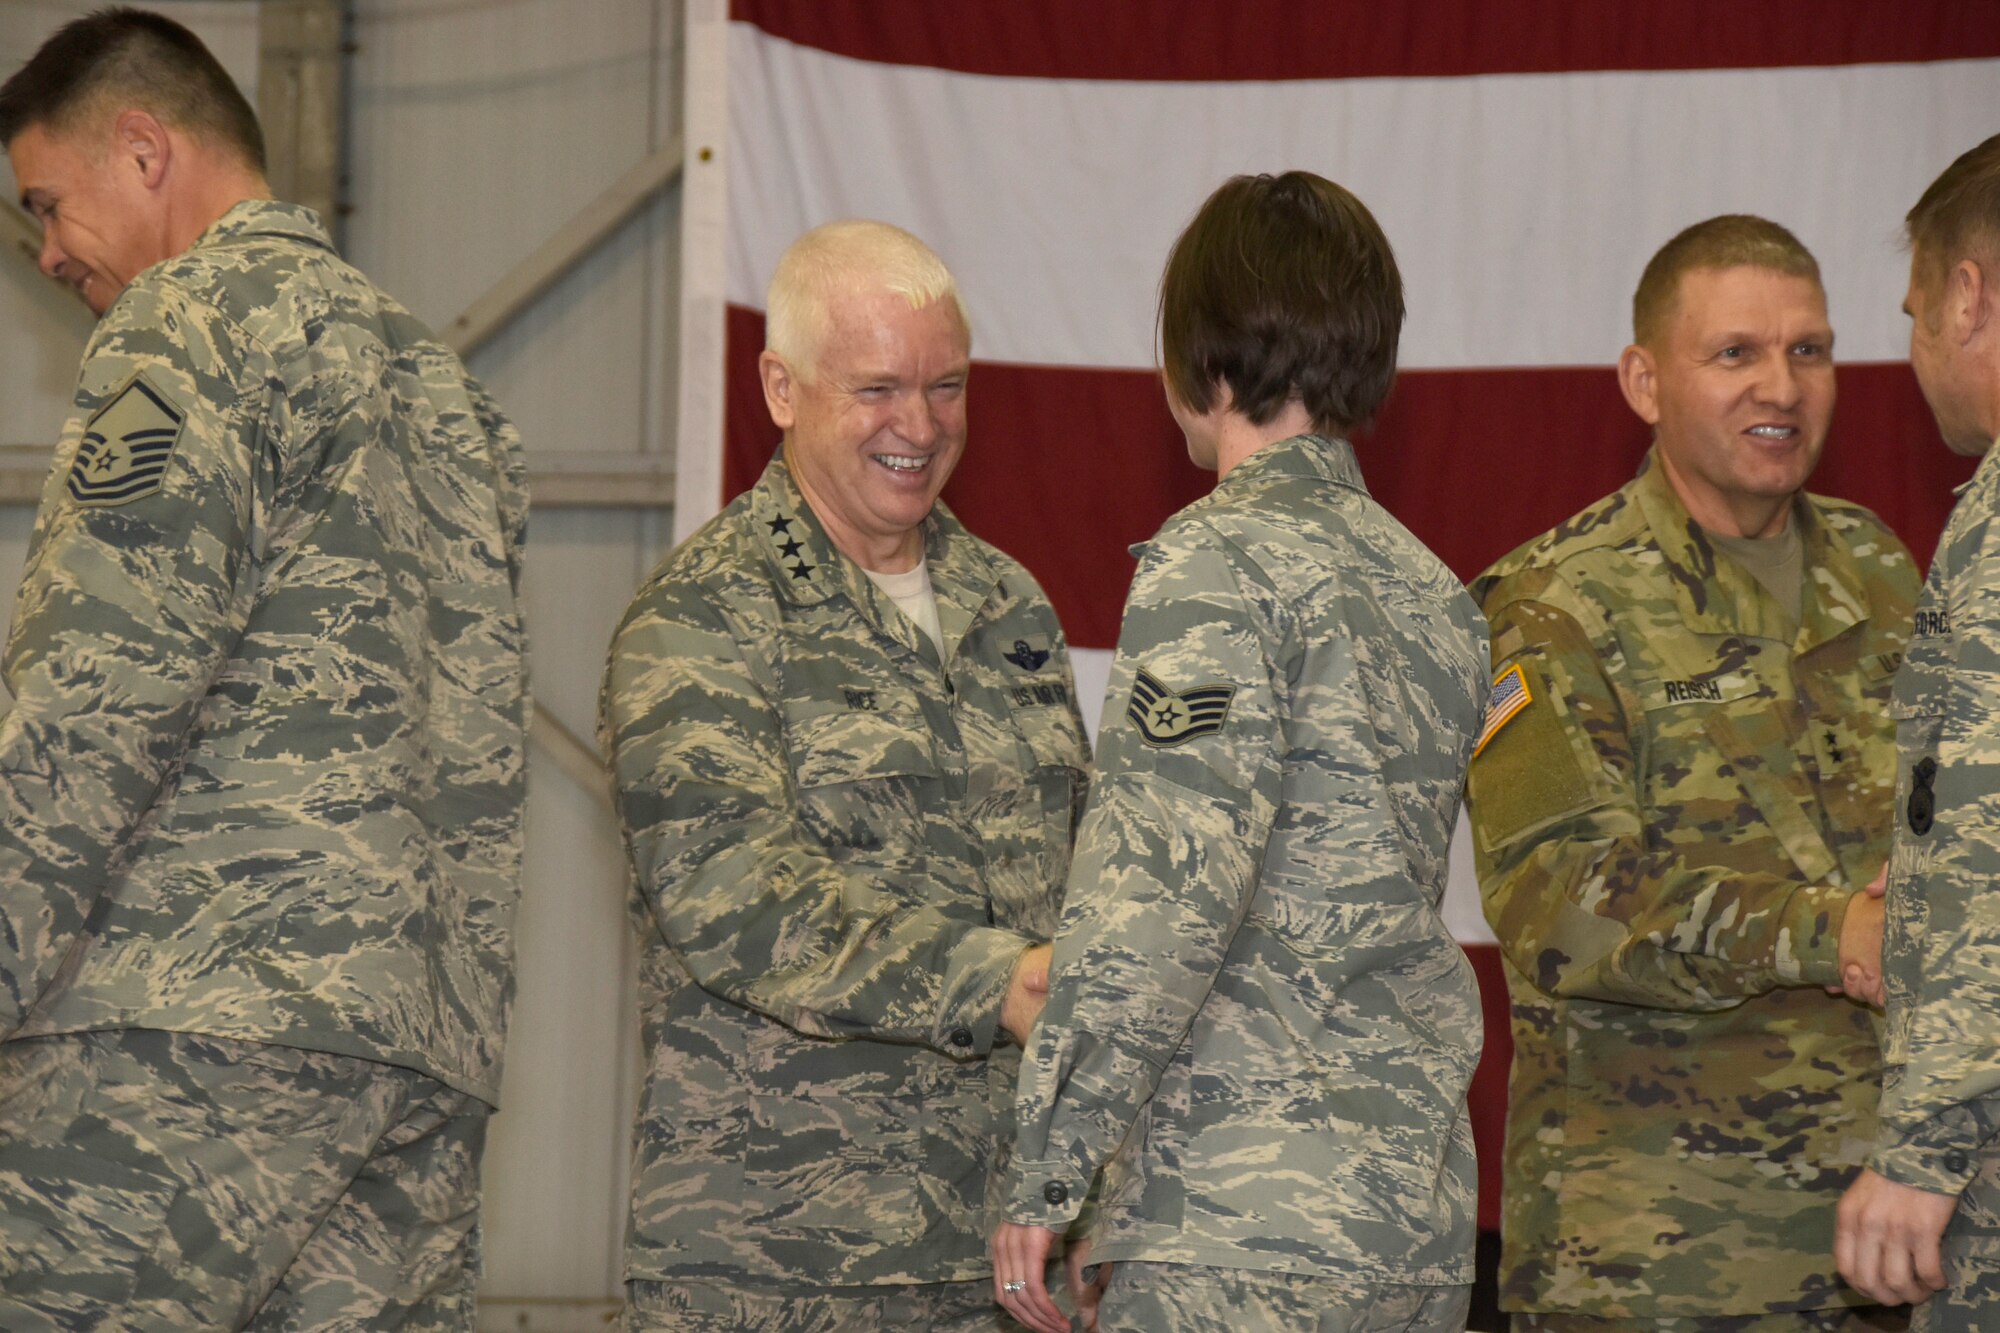 Lt. Gen. L. Scott Rice, Air National Guard director, and Maj. Gen. Timothy Reisch, the Adjutant General, South Dakota National Guard, shake hands with Airmen from the 114th Fighter Wing during a recognition ceremony, Nov. 5, 2016. Rice and Reisch also toured base facilities during their visit to the South Dakota Air National Guard. (U.S. Air National Guard photo by Tech. Sgt. Luke Olson/Released)